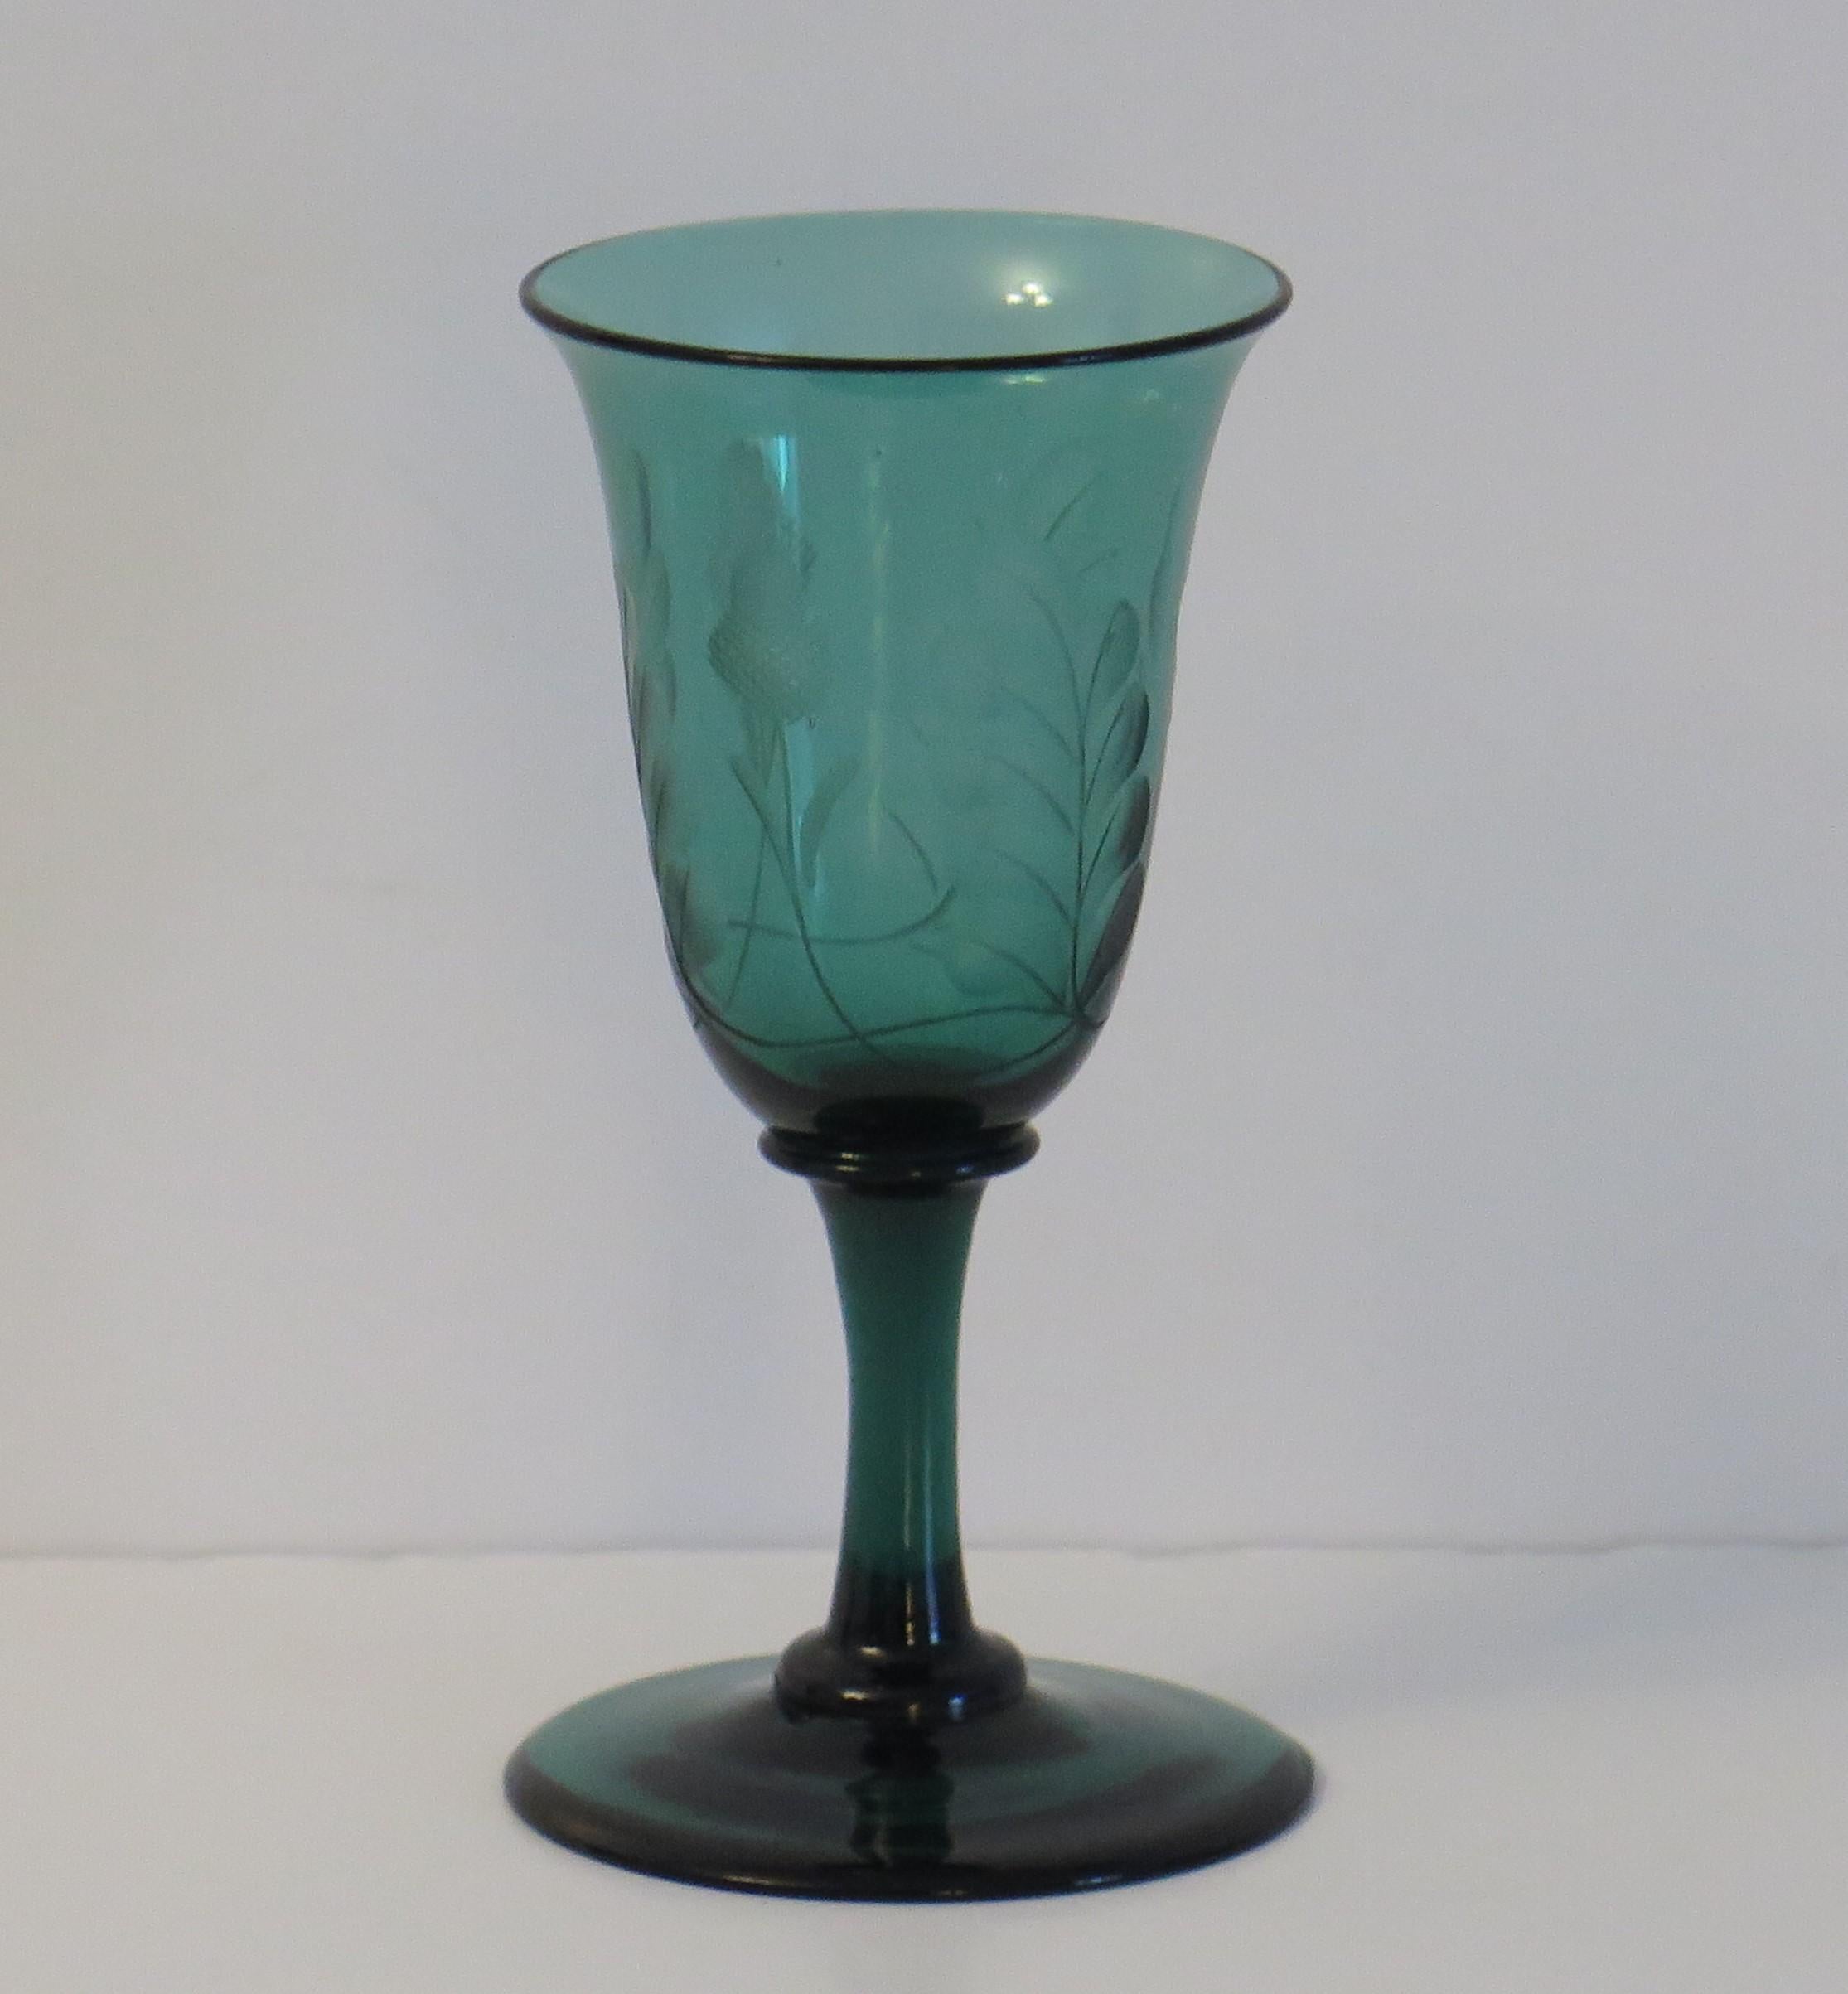 This is an excellent example of an early 19th century, English, hand blown, Bristol green wine drinking glass, with an engraved bowl of acorns and oak leaves. which we date to the George 111rd Regency period, circa 1815.

This glass has an elegant